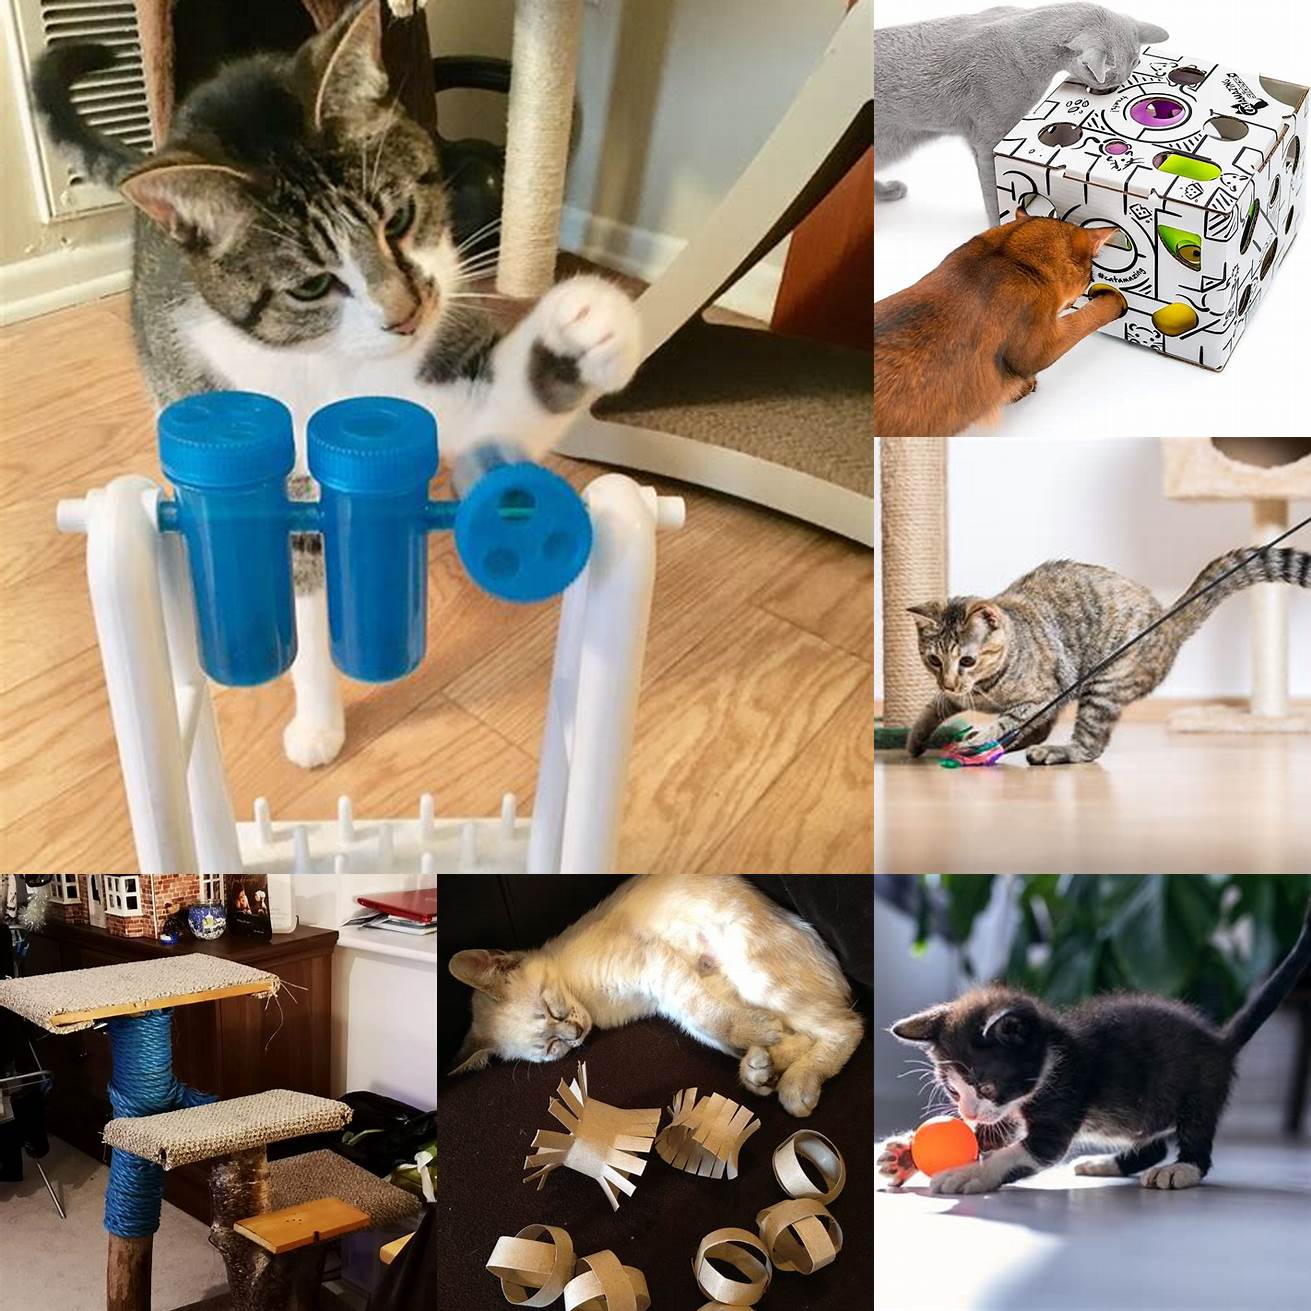 Provides a fun and playful activity for cats